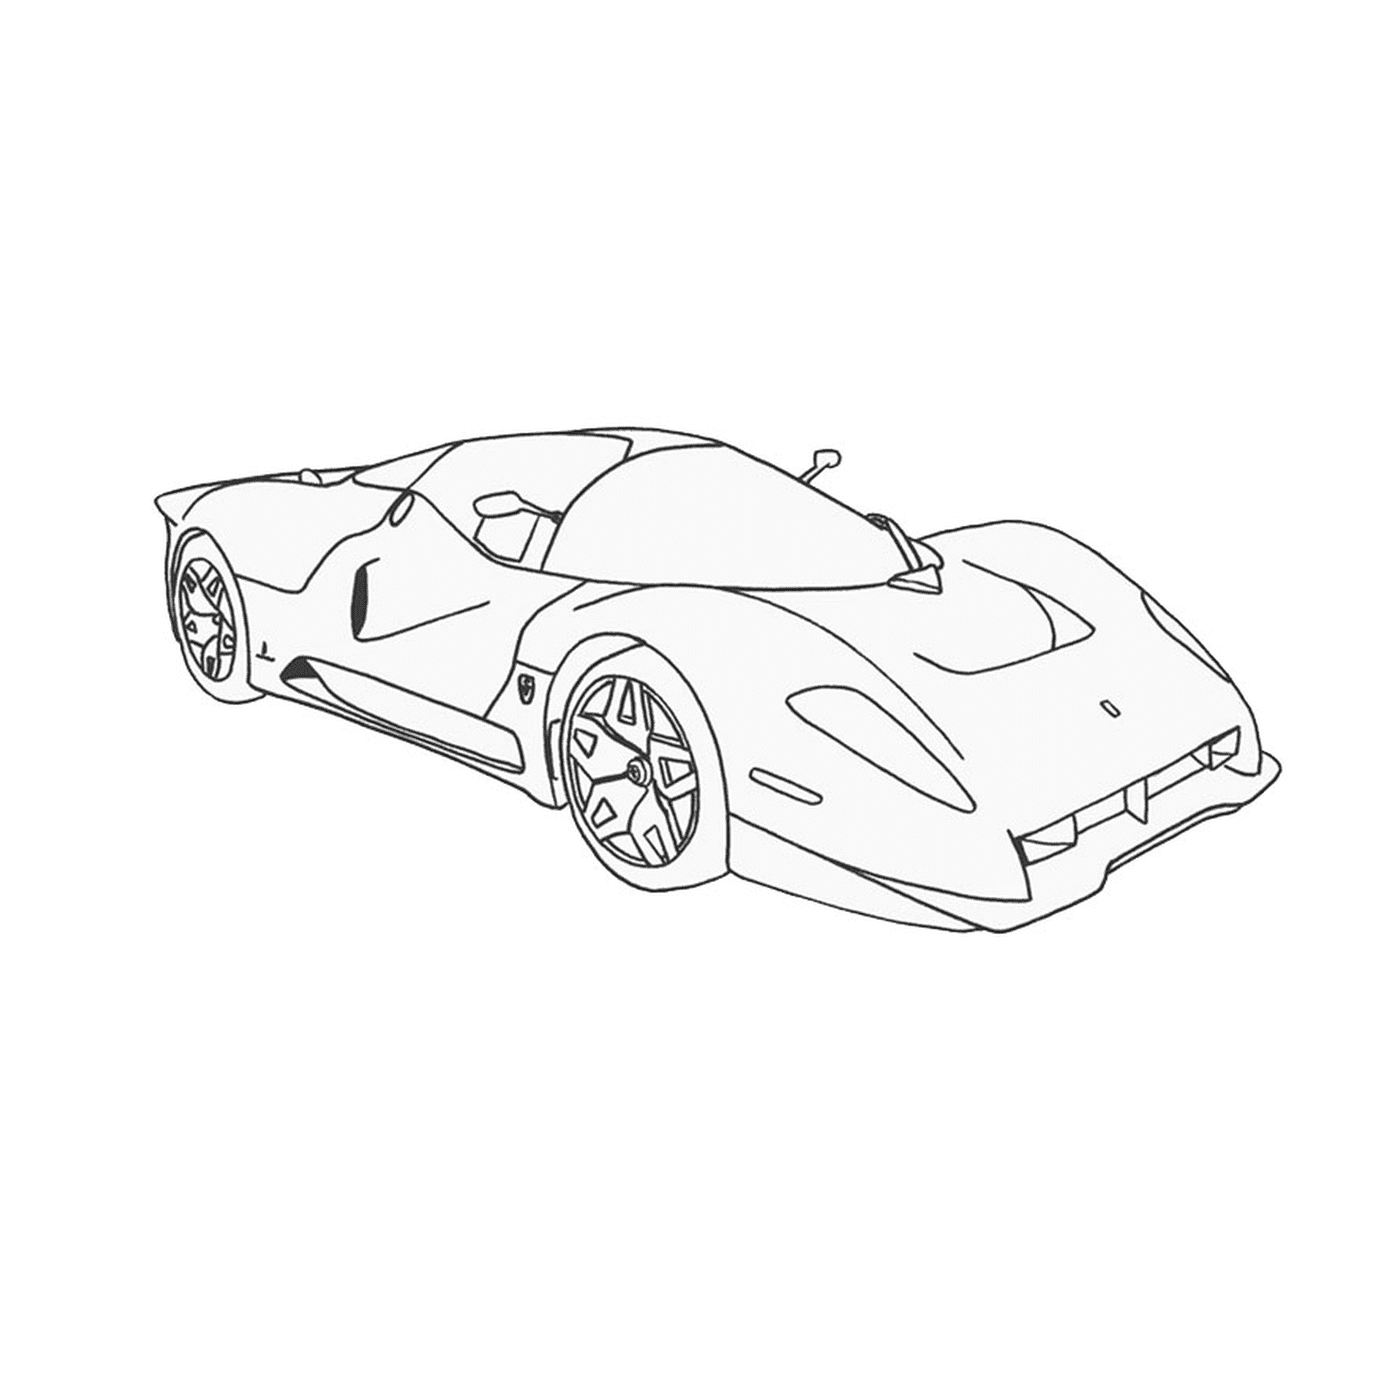  Drawing of a car 